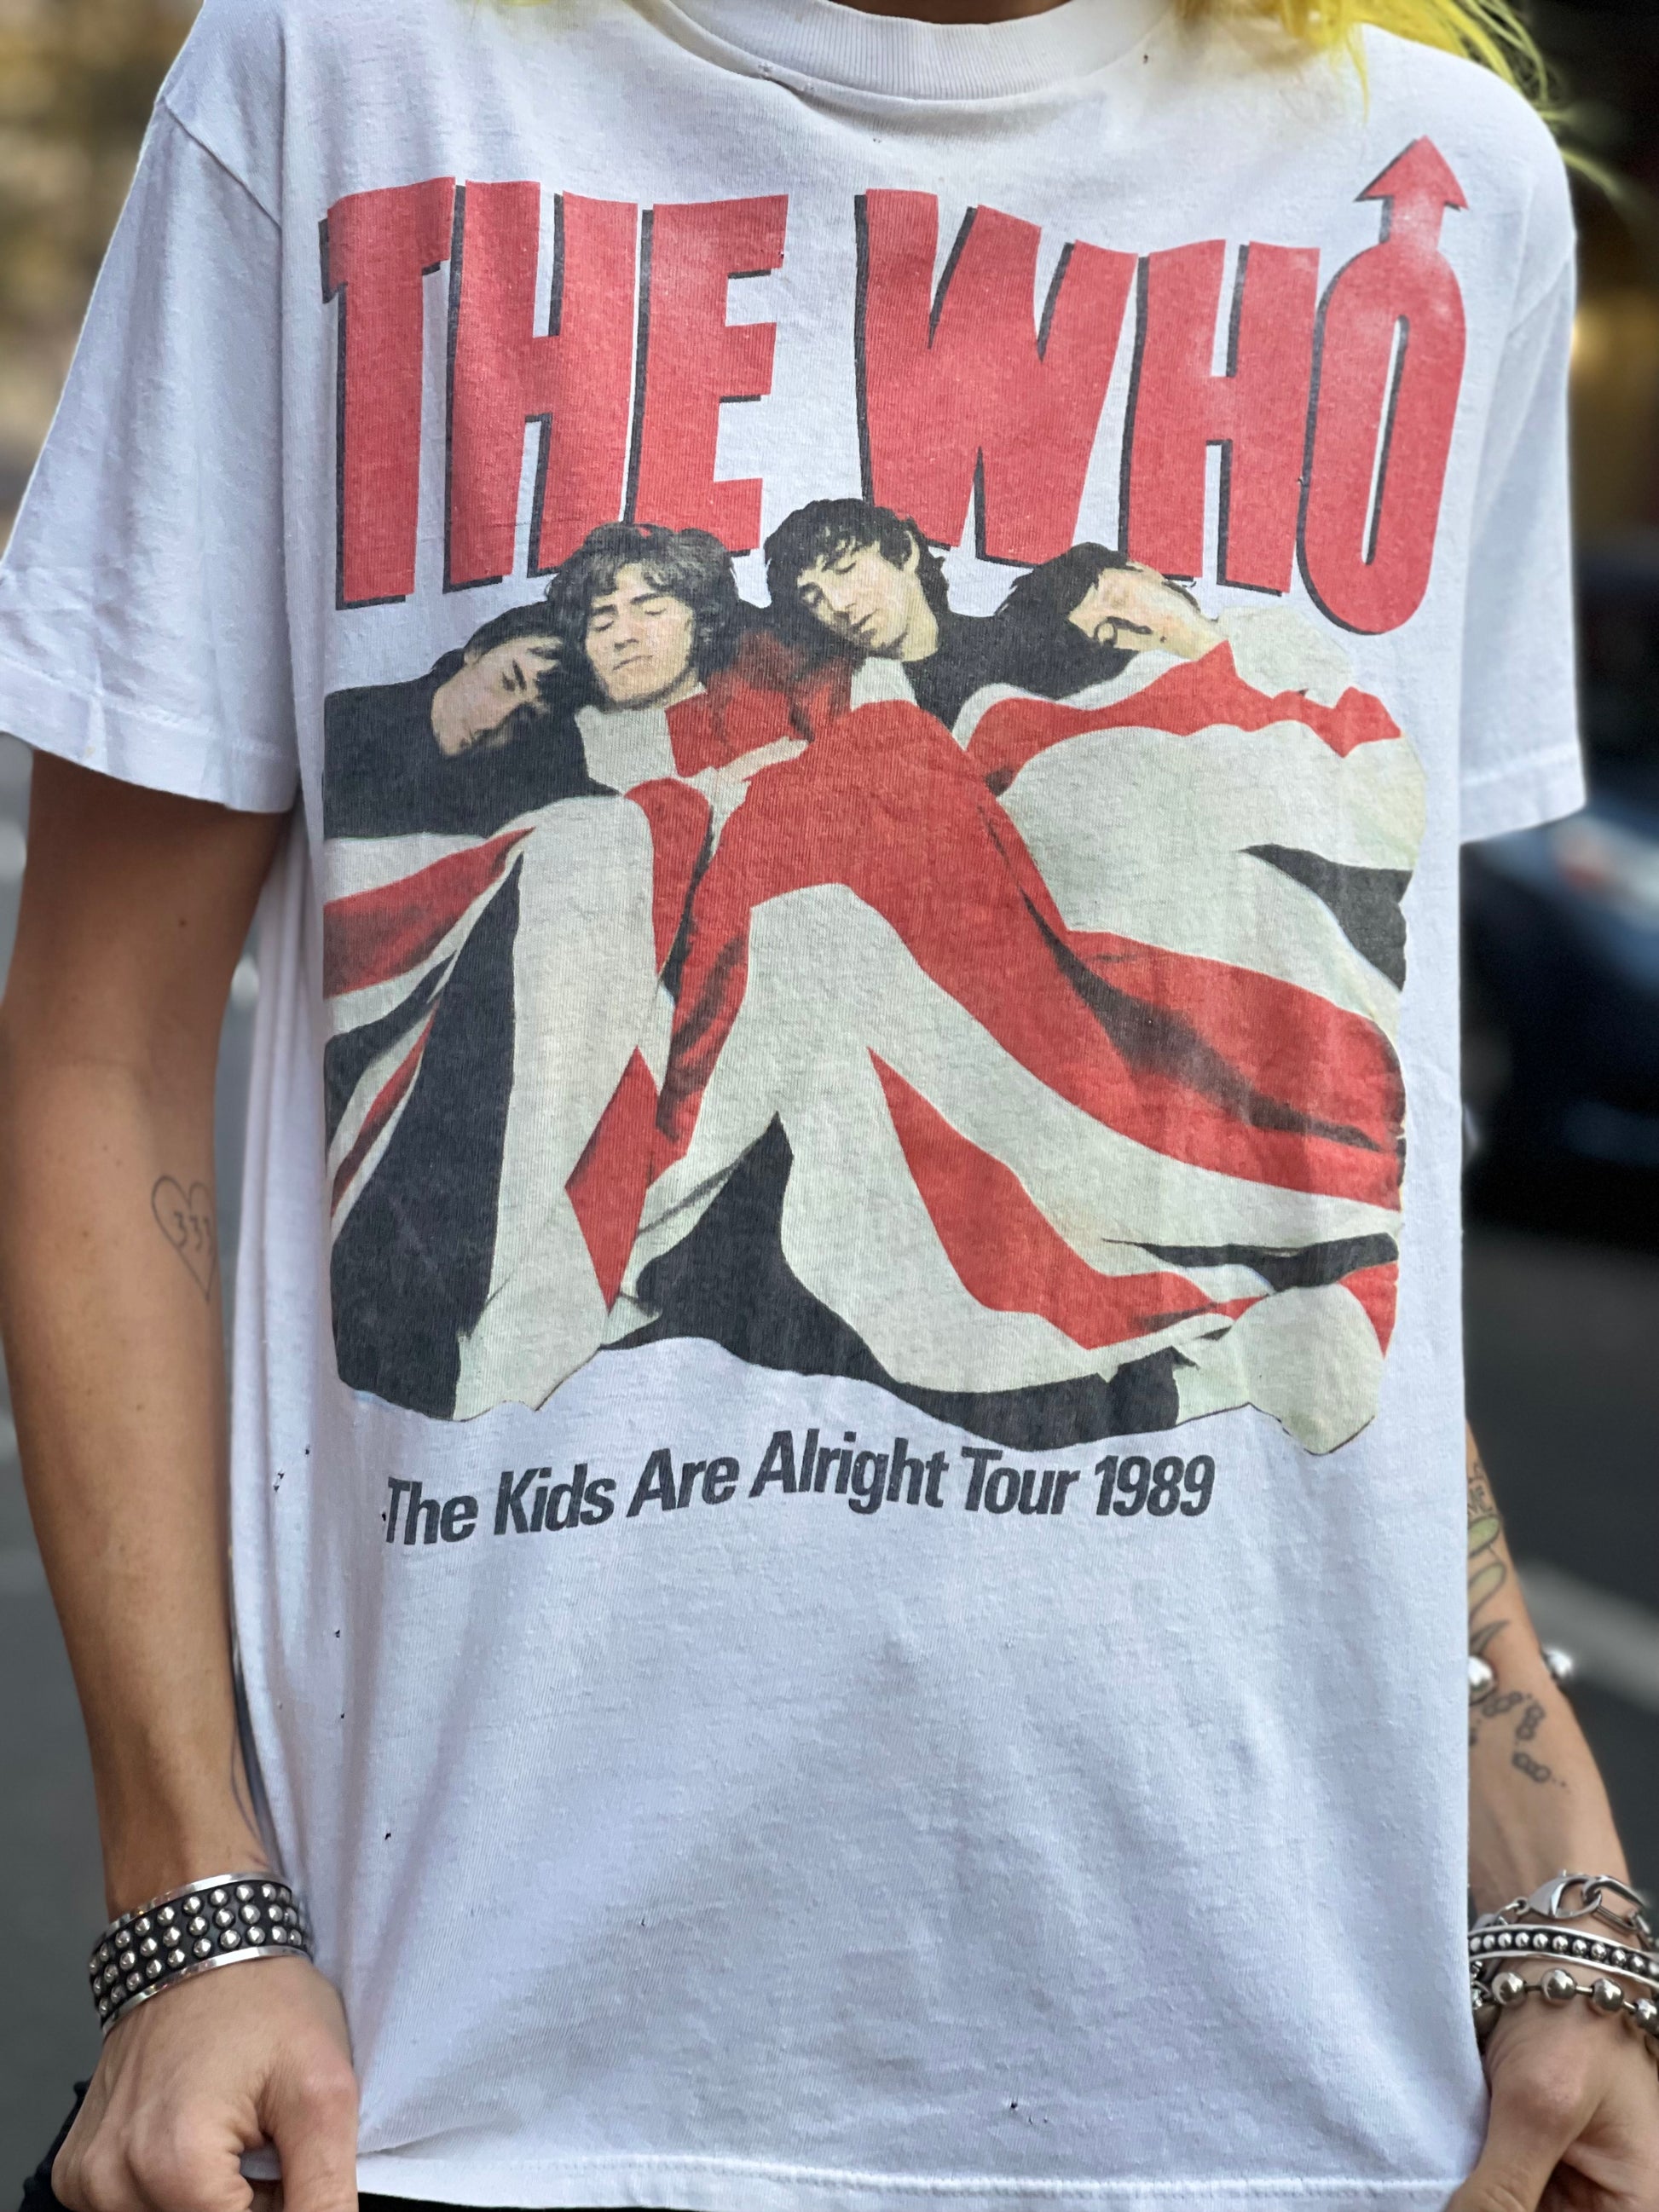 Vintage British Rock Band The WHO T-shirt – Spark Pretty